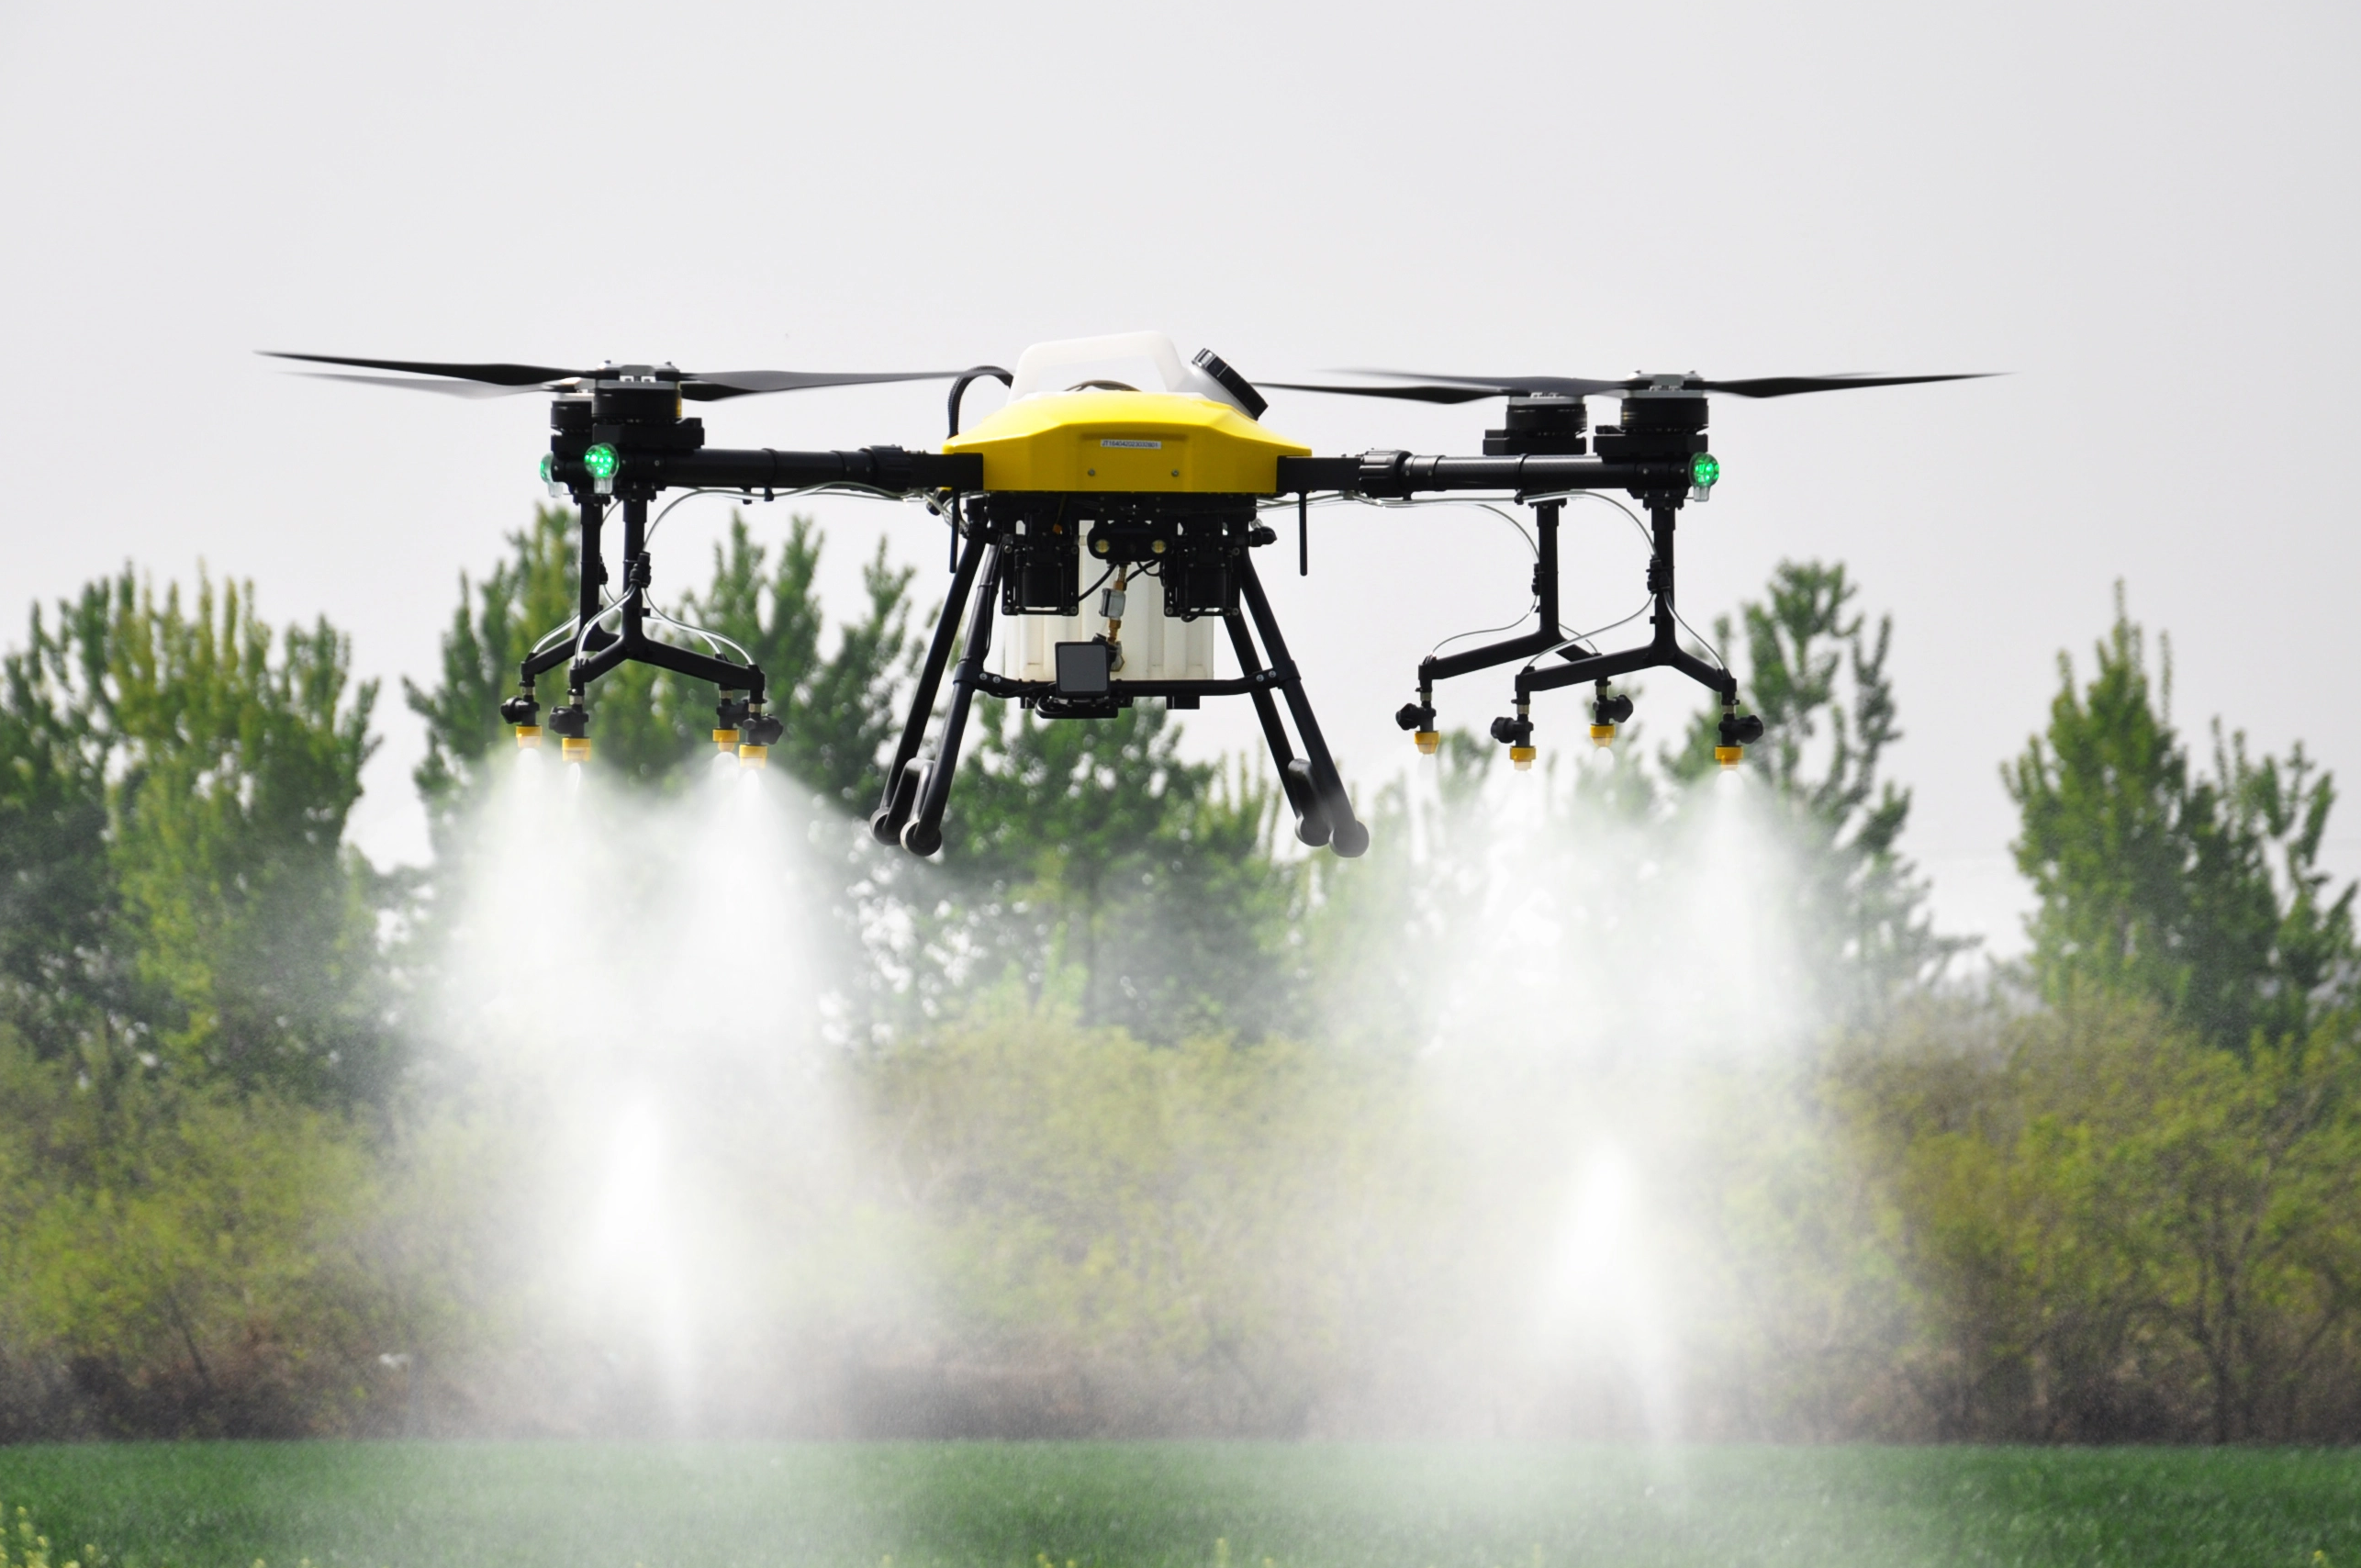 Remote Control Agricultural Drone Sprayer 10 20 Liters Drones Agri Pesticide Spraying Farming Crop Unmanned Aerial Spraying Drone for Farming